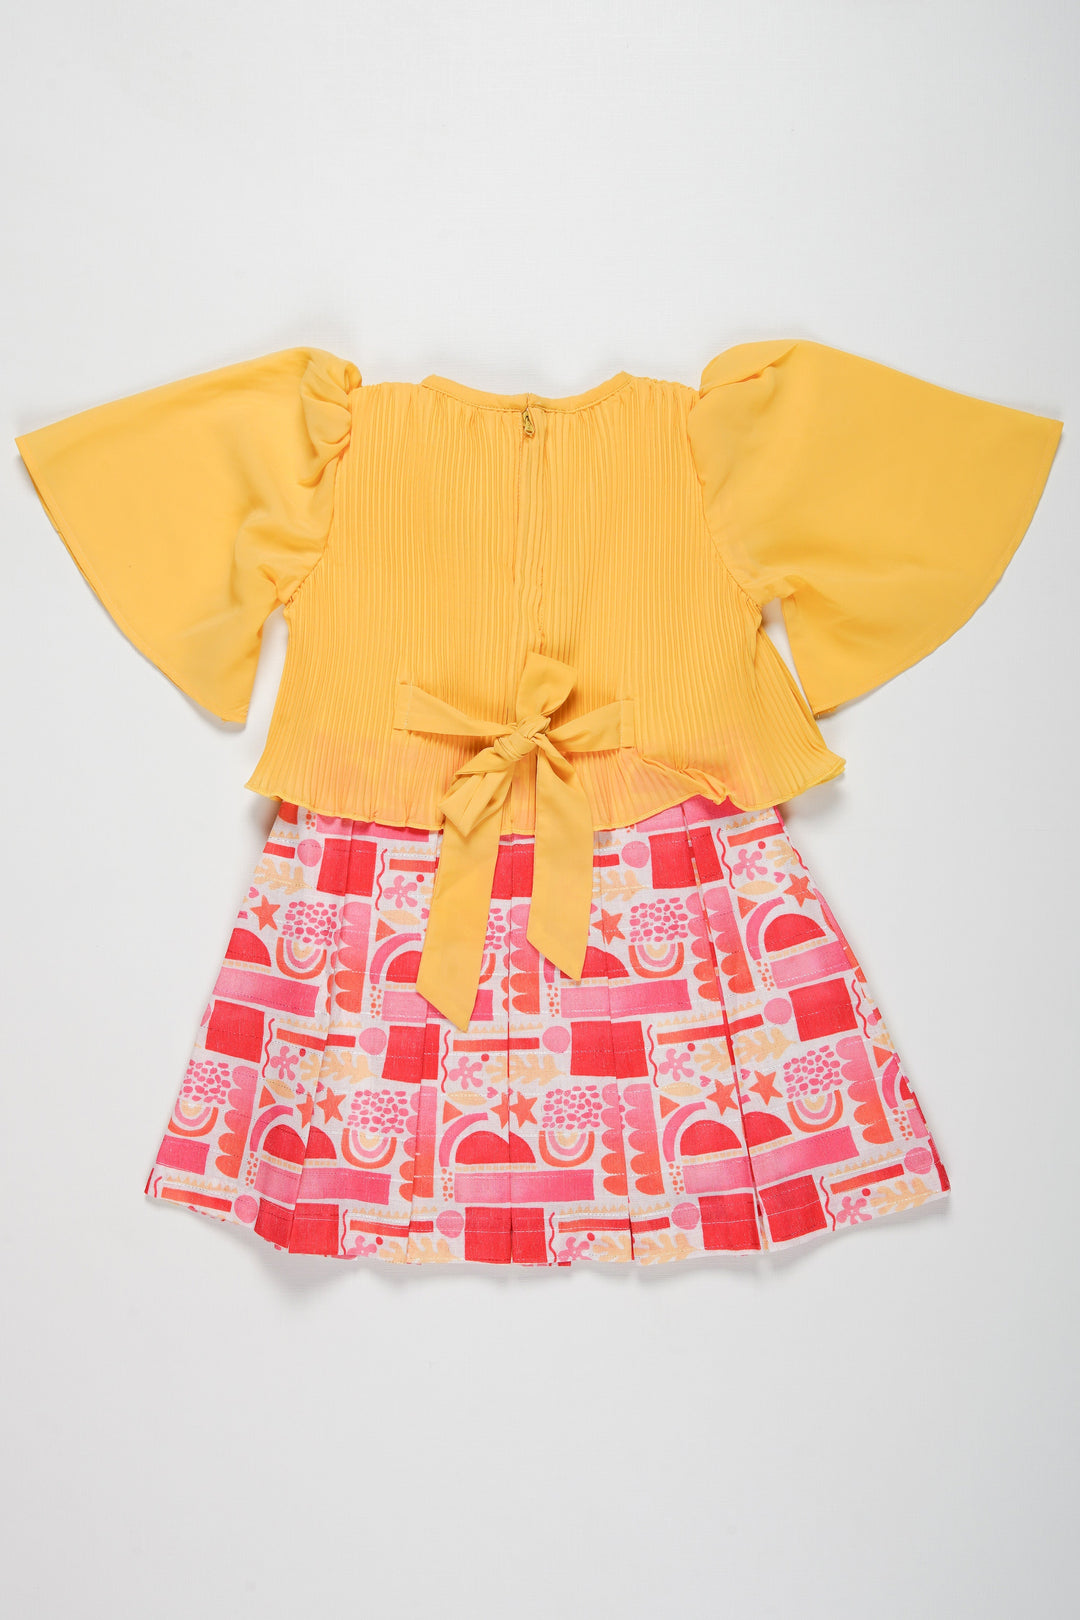 The Nesavu Girls Fancy Frock Stylish Playtime Cotton Frock for Girls - Bright Yellow and Pink Nesavu Discover Elegant New Cotton Frocks for Girls | Soft and Fancy Designs Available | The Nesavu